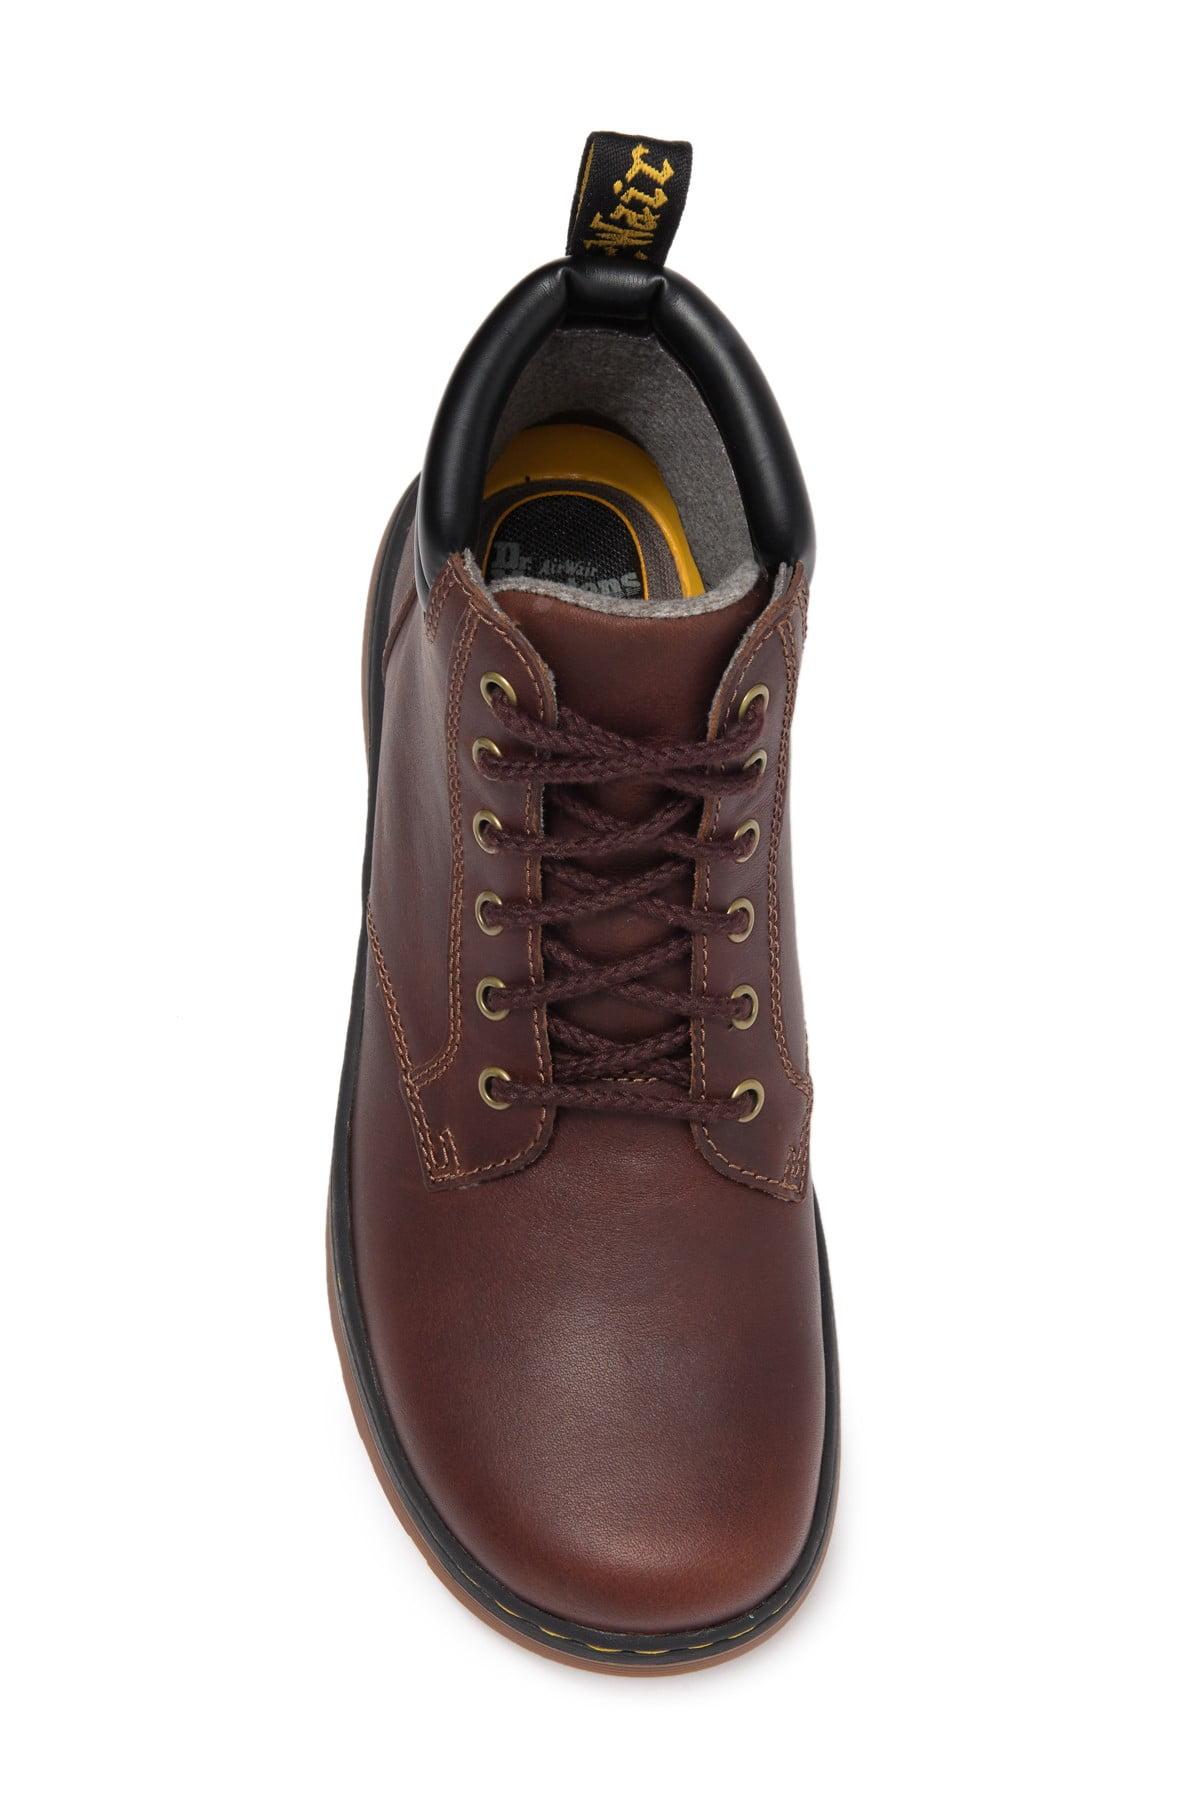 Dr. Martens Leather Tipton Lace-up Boot in Dark Brown+Black (Brown) for Men  - Lyst